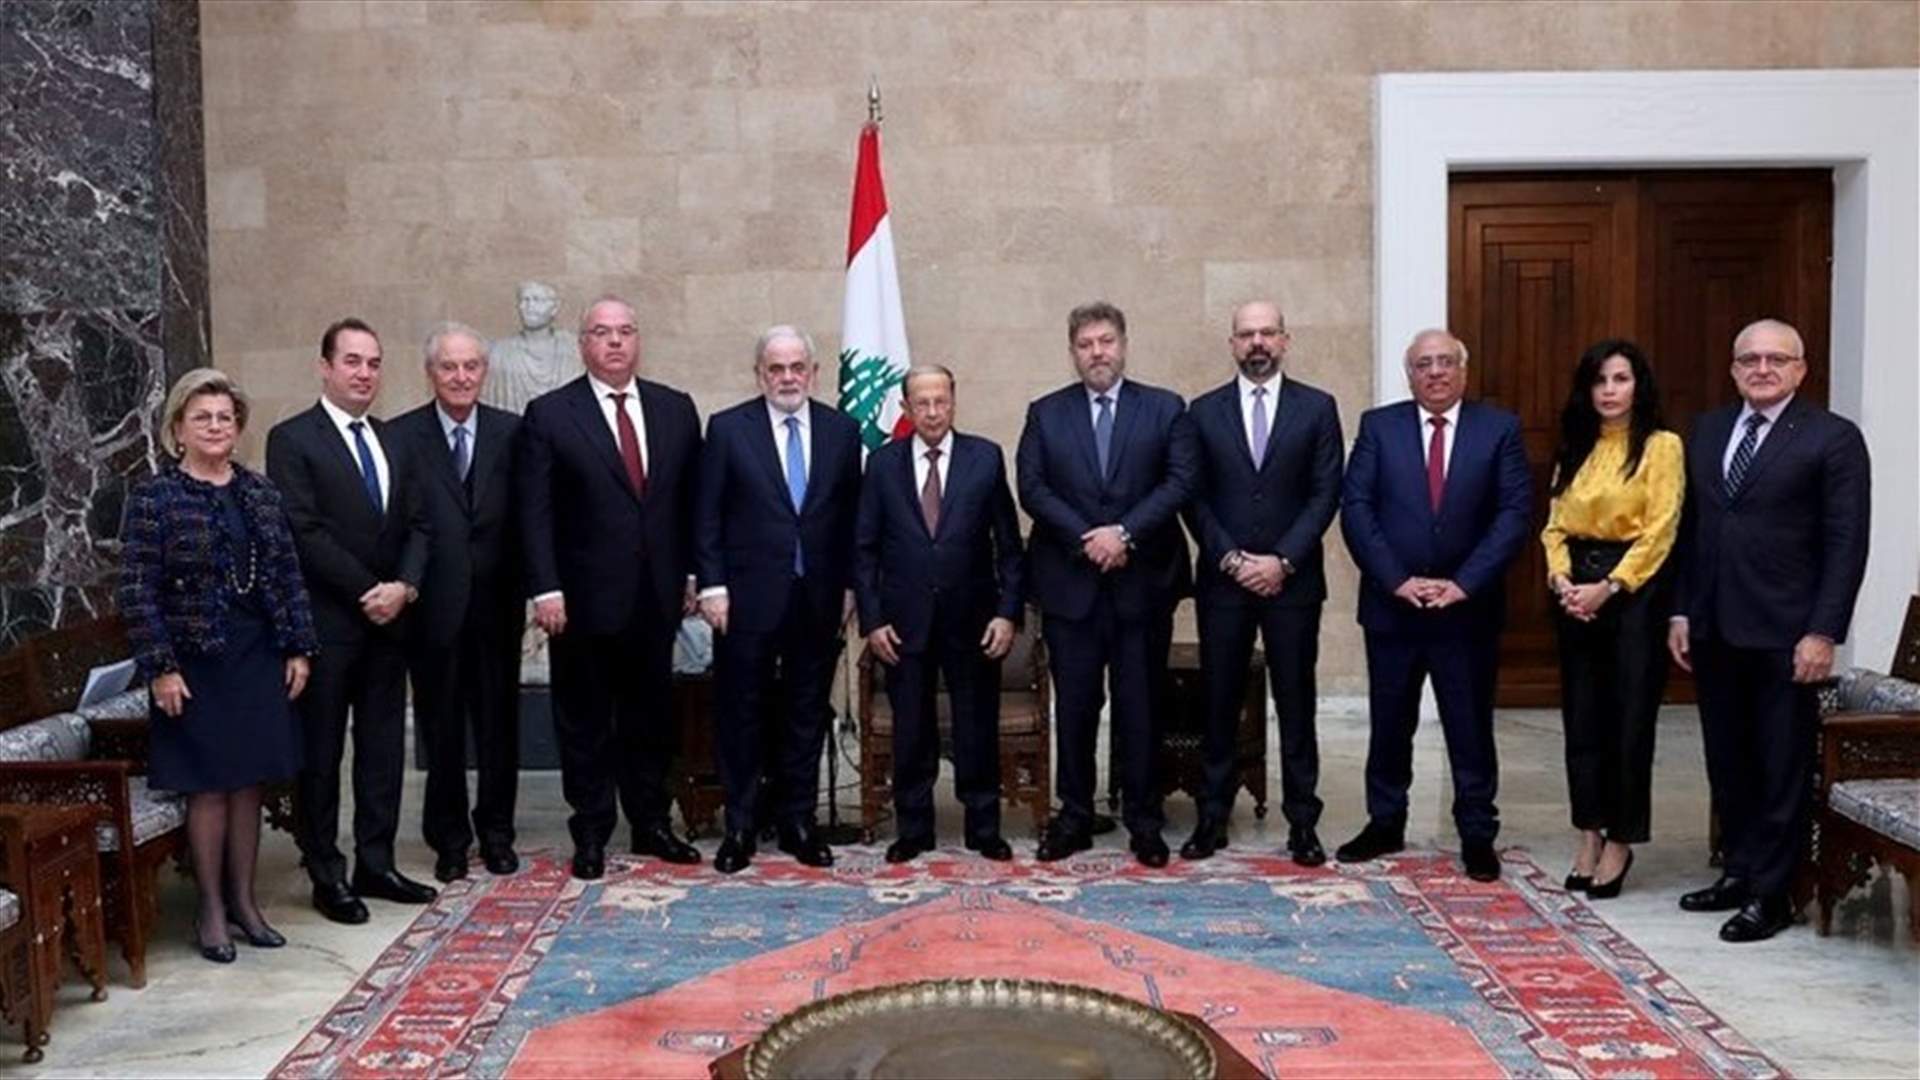 President Aoun hopes government will be formed next week - statement